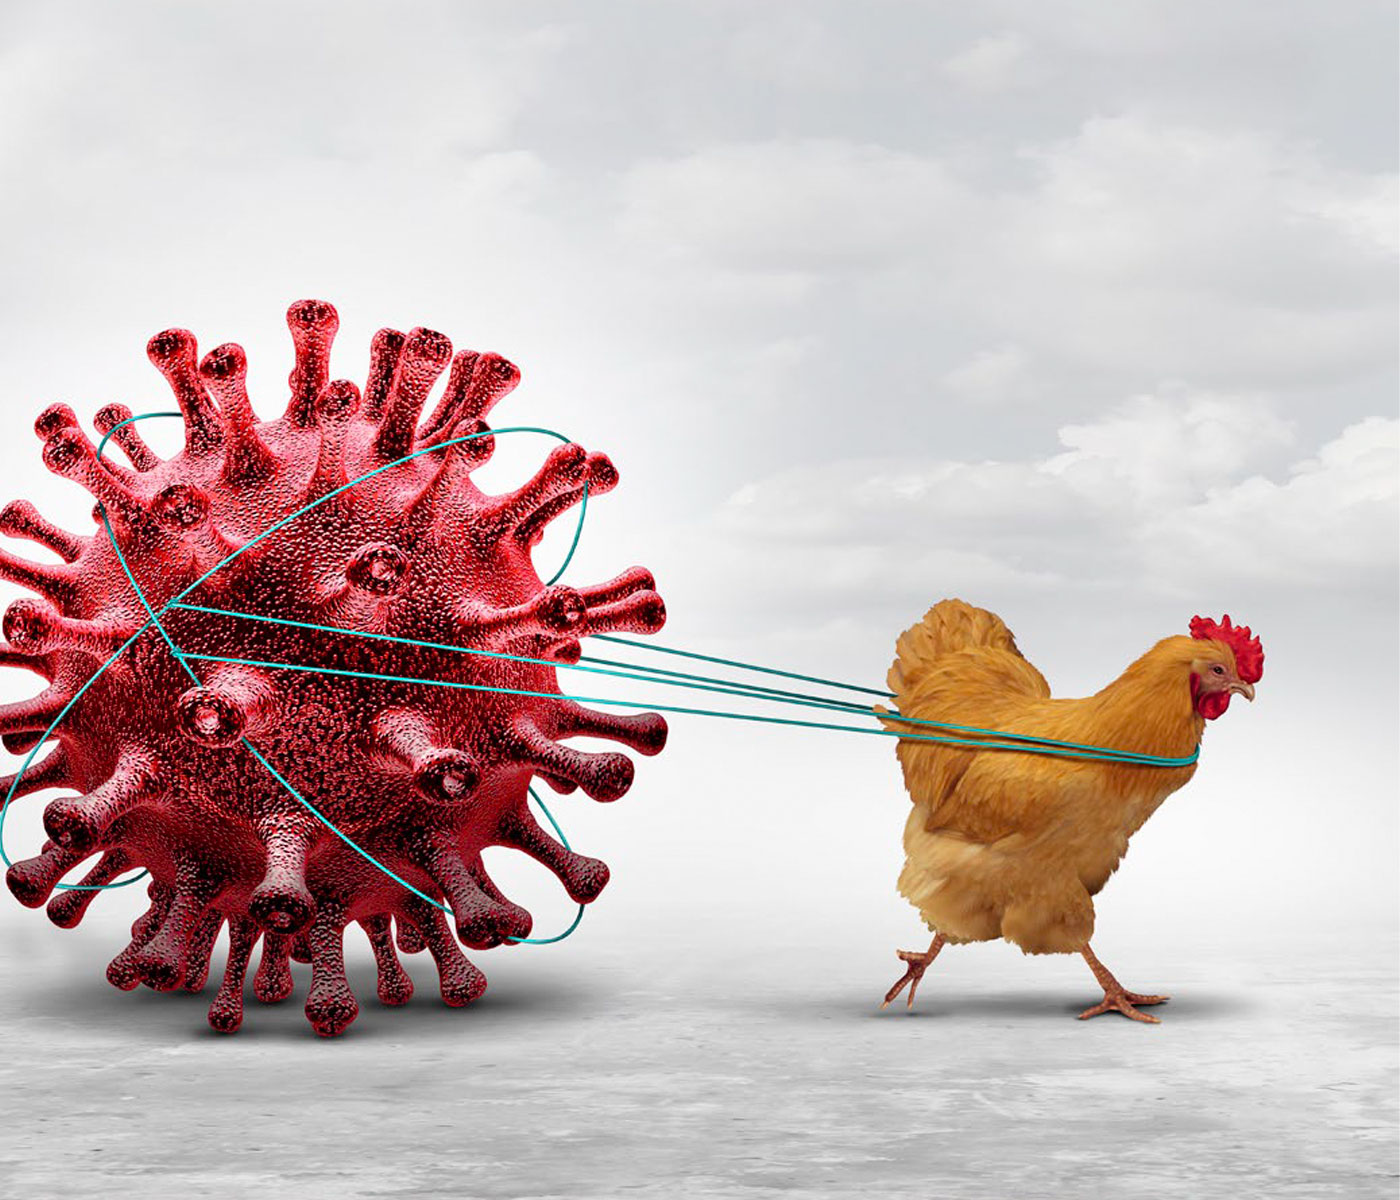 Avian Influenza: A Global Threat to the Poultry Industry